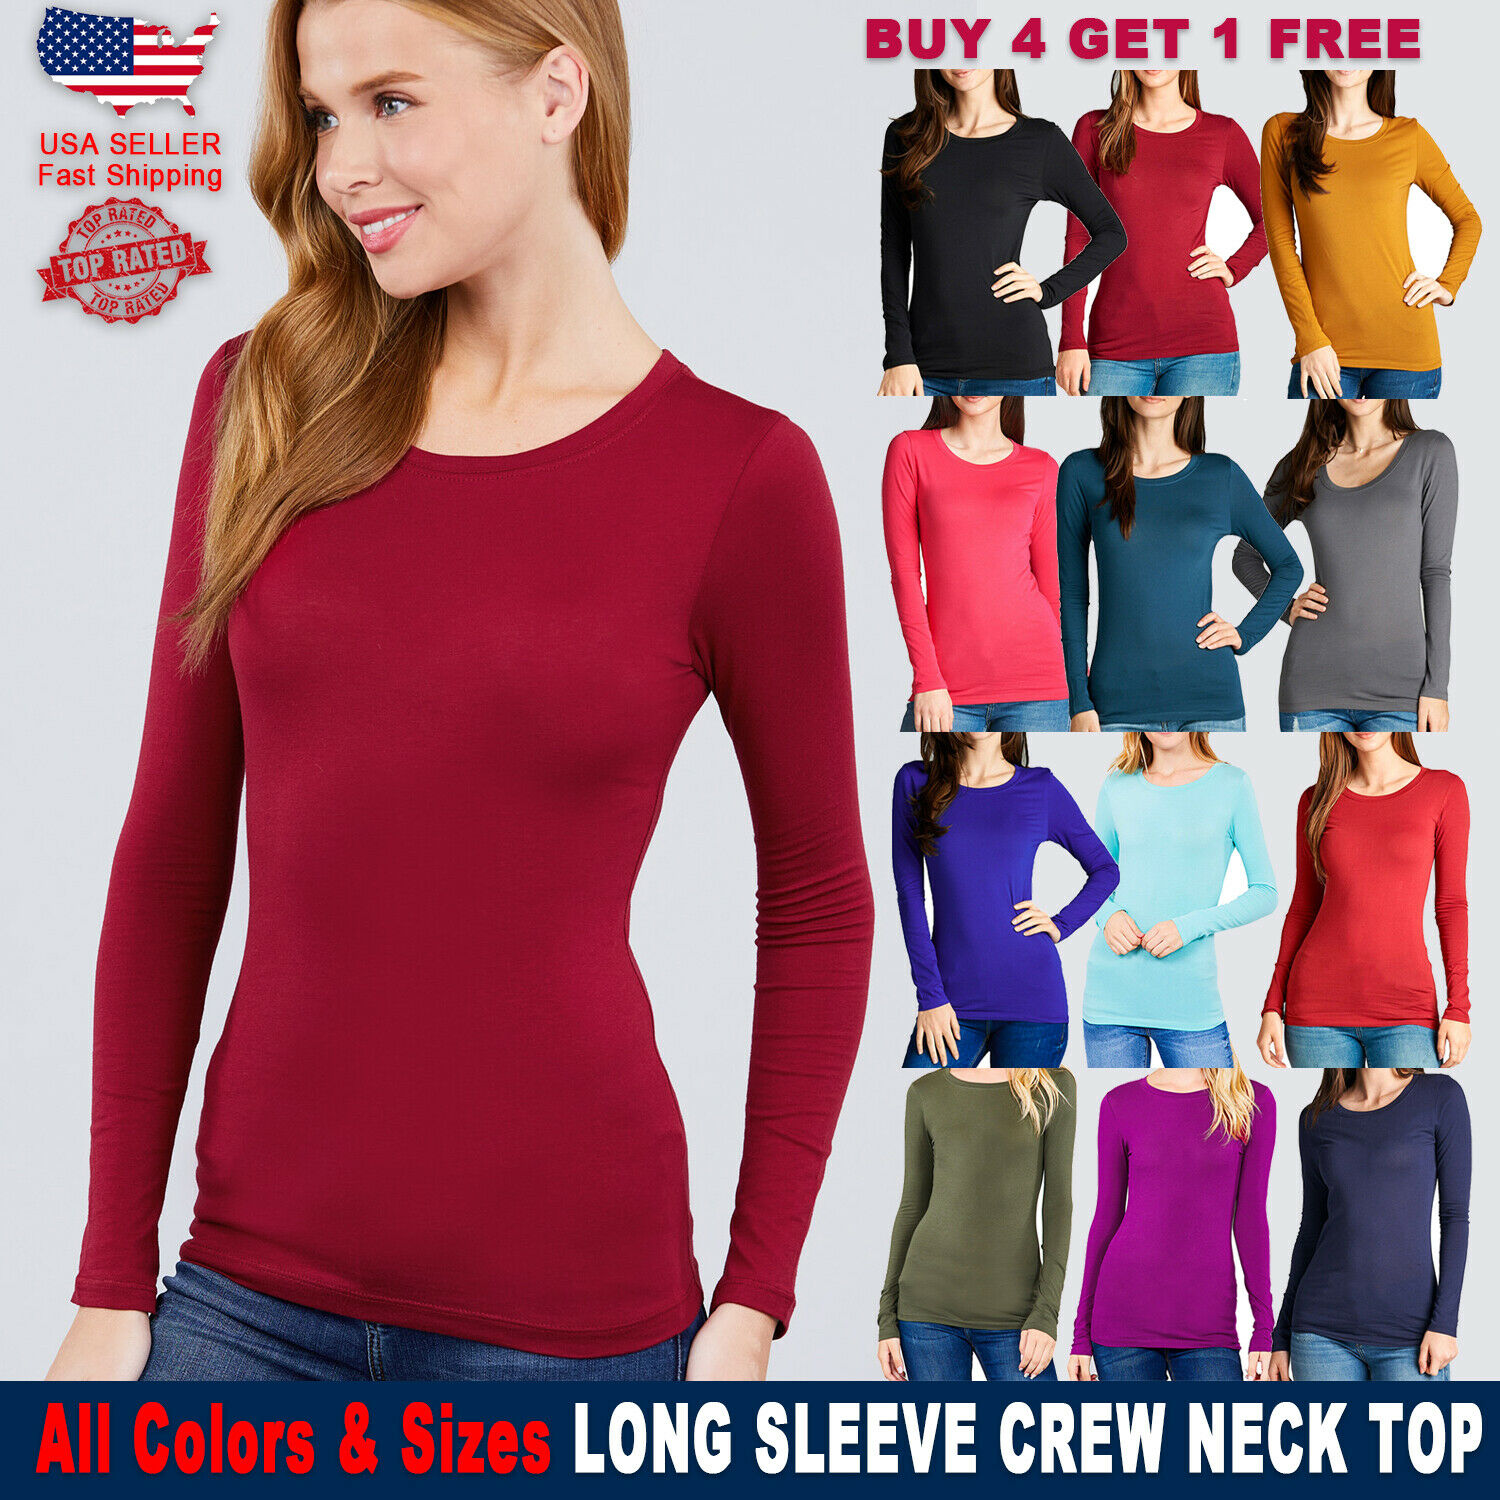 New Women's Spandex Cotton Solid Long Sleeve T-shirts Crew Neck Basic Top S M L